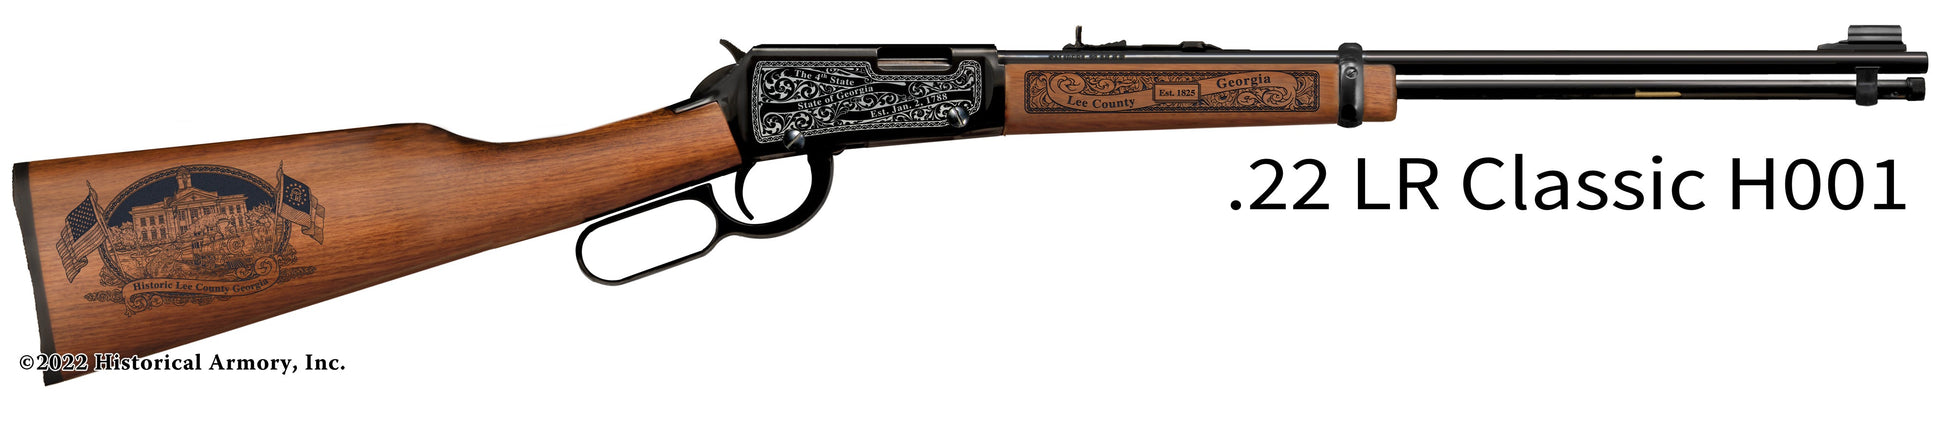 Lee County Georgia Engraved Henry H001 Rifle